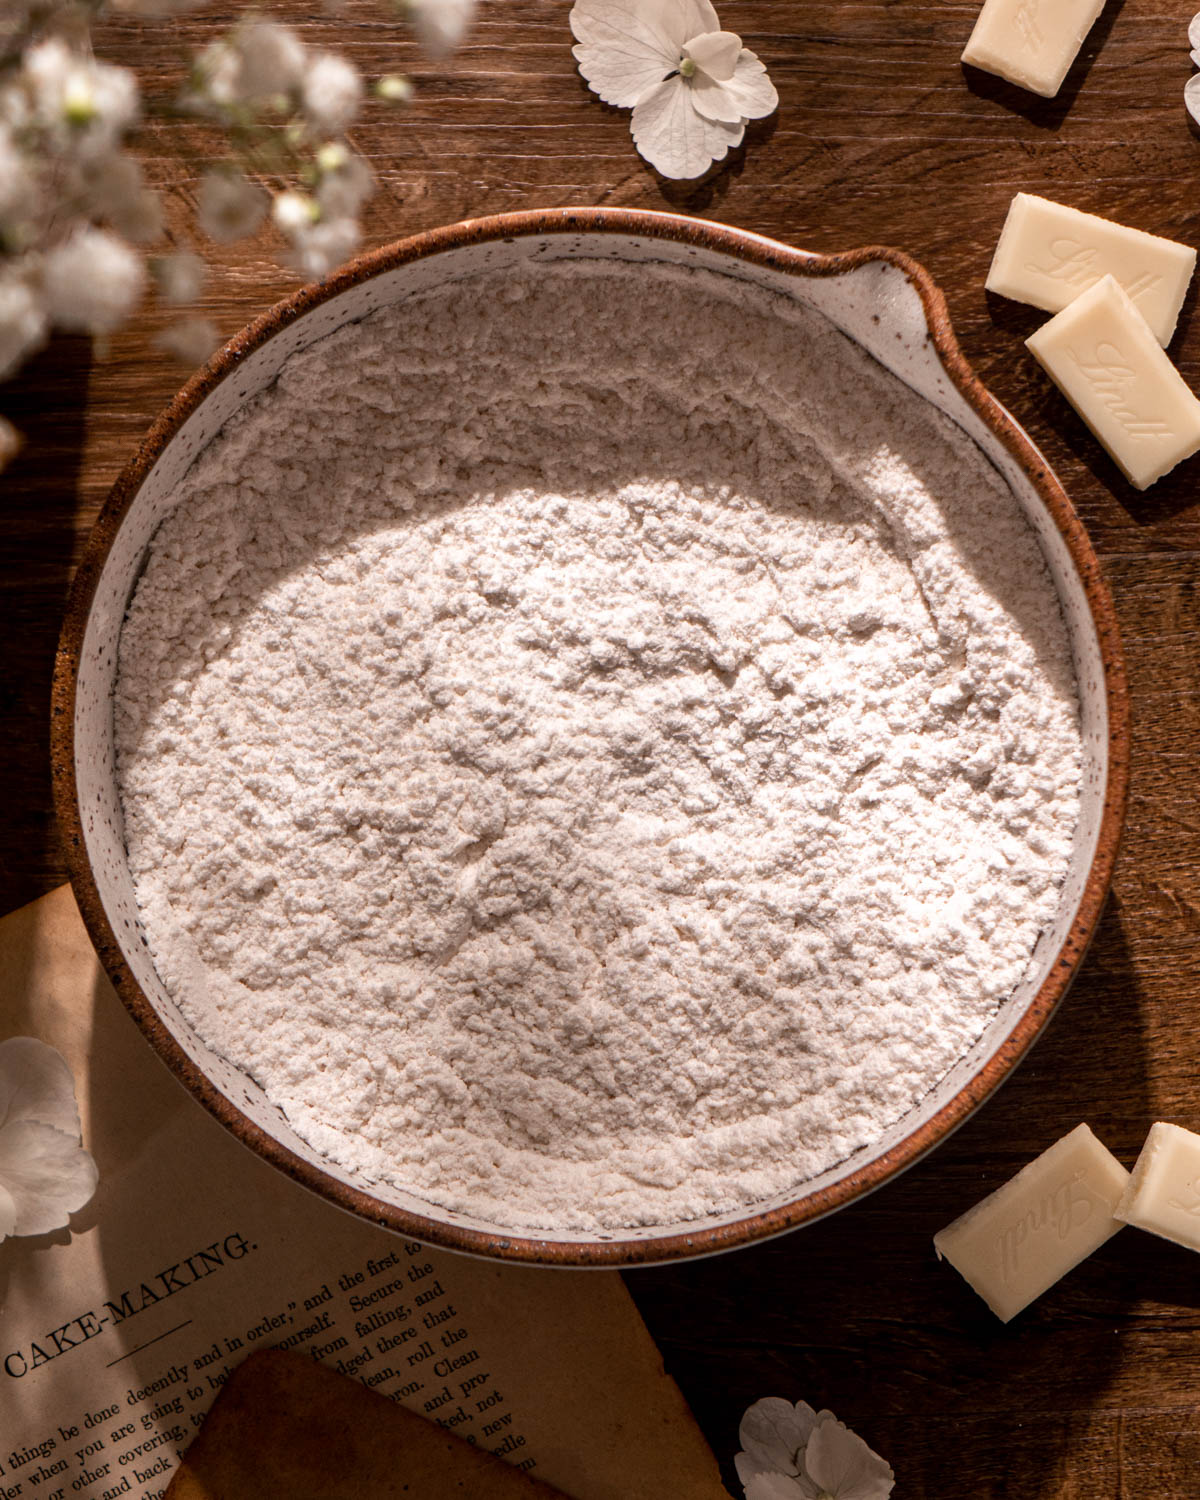 flour, baking powder, baking soda and salt whisked together in a ceramic bowl